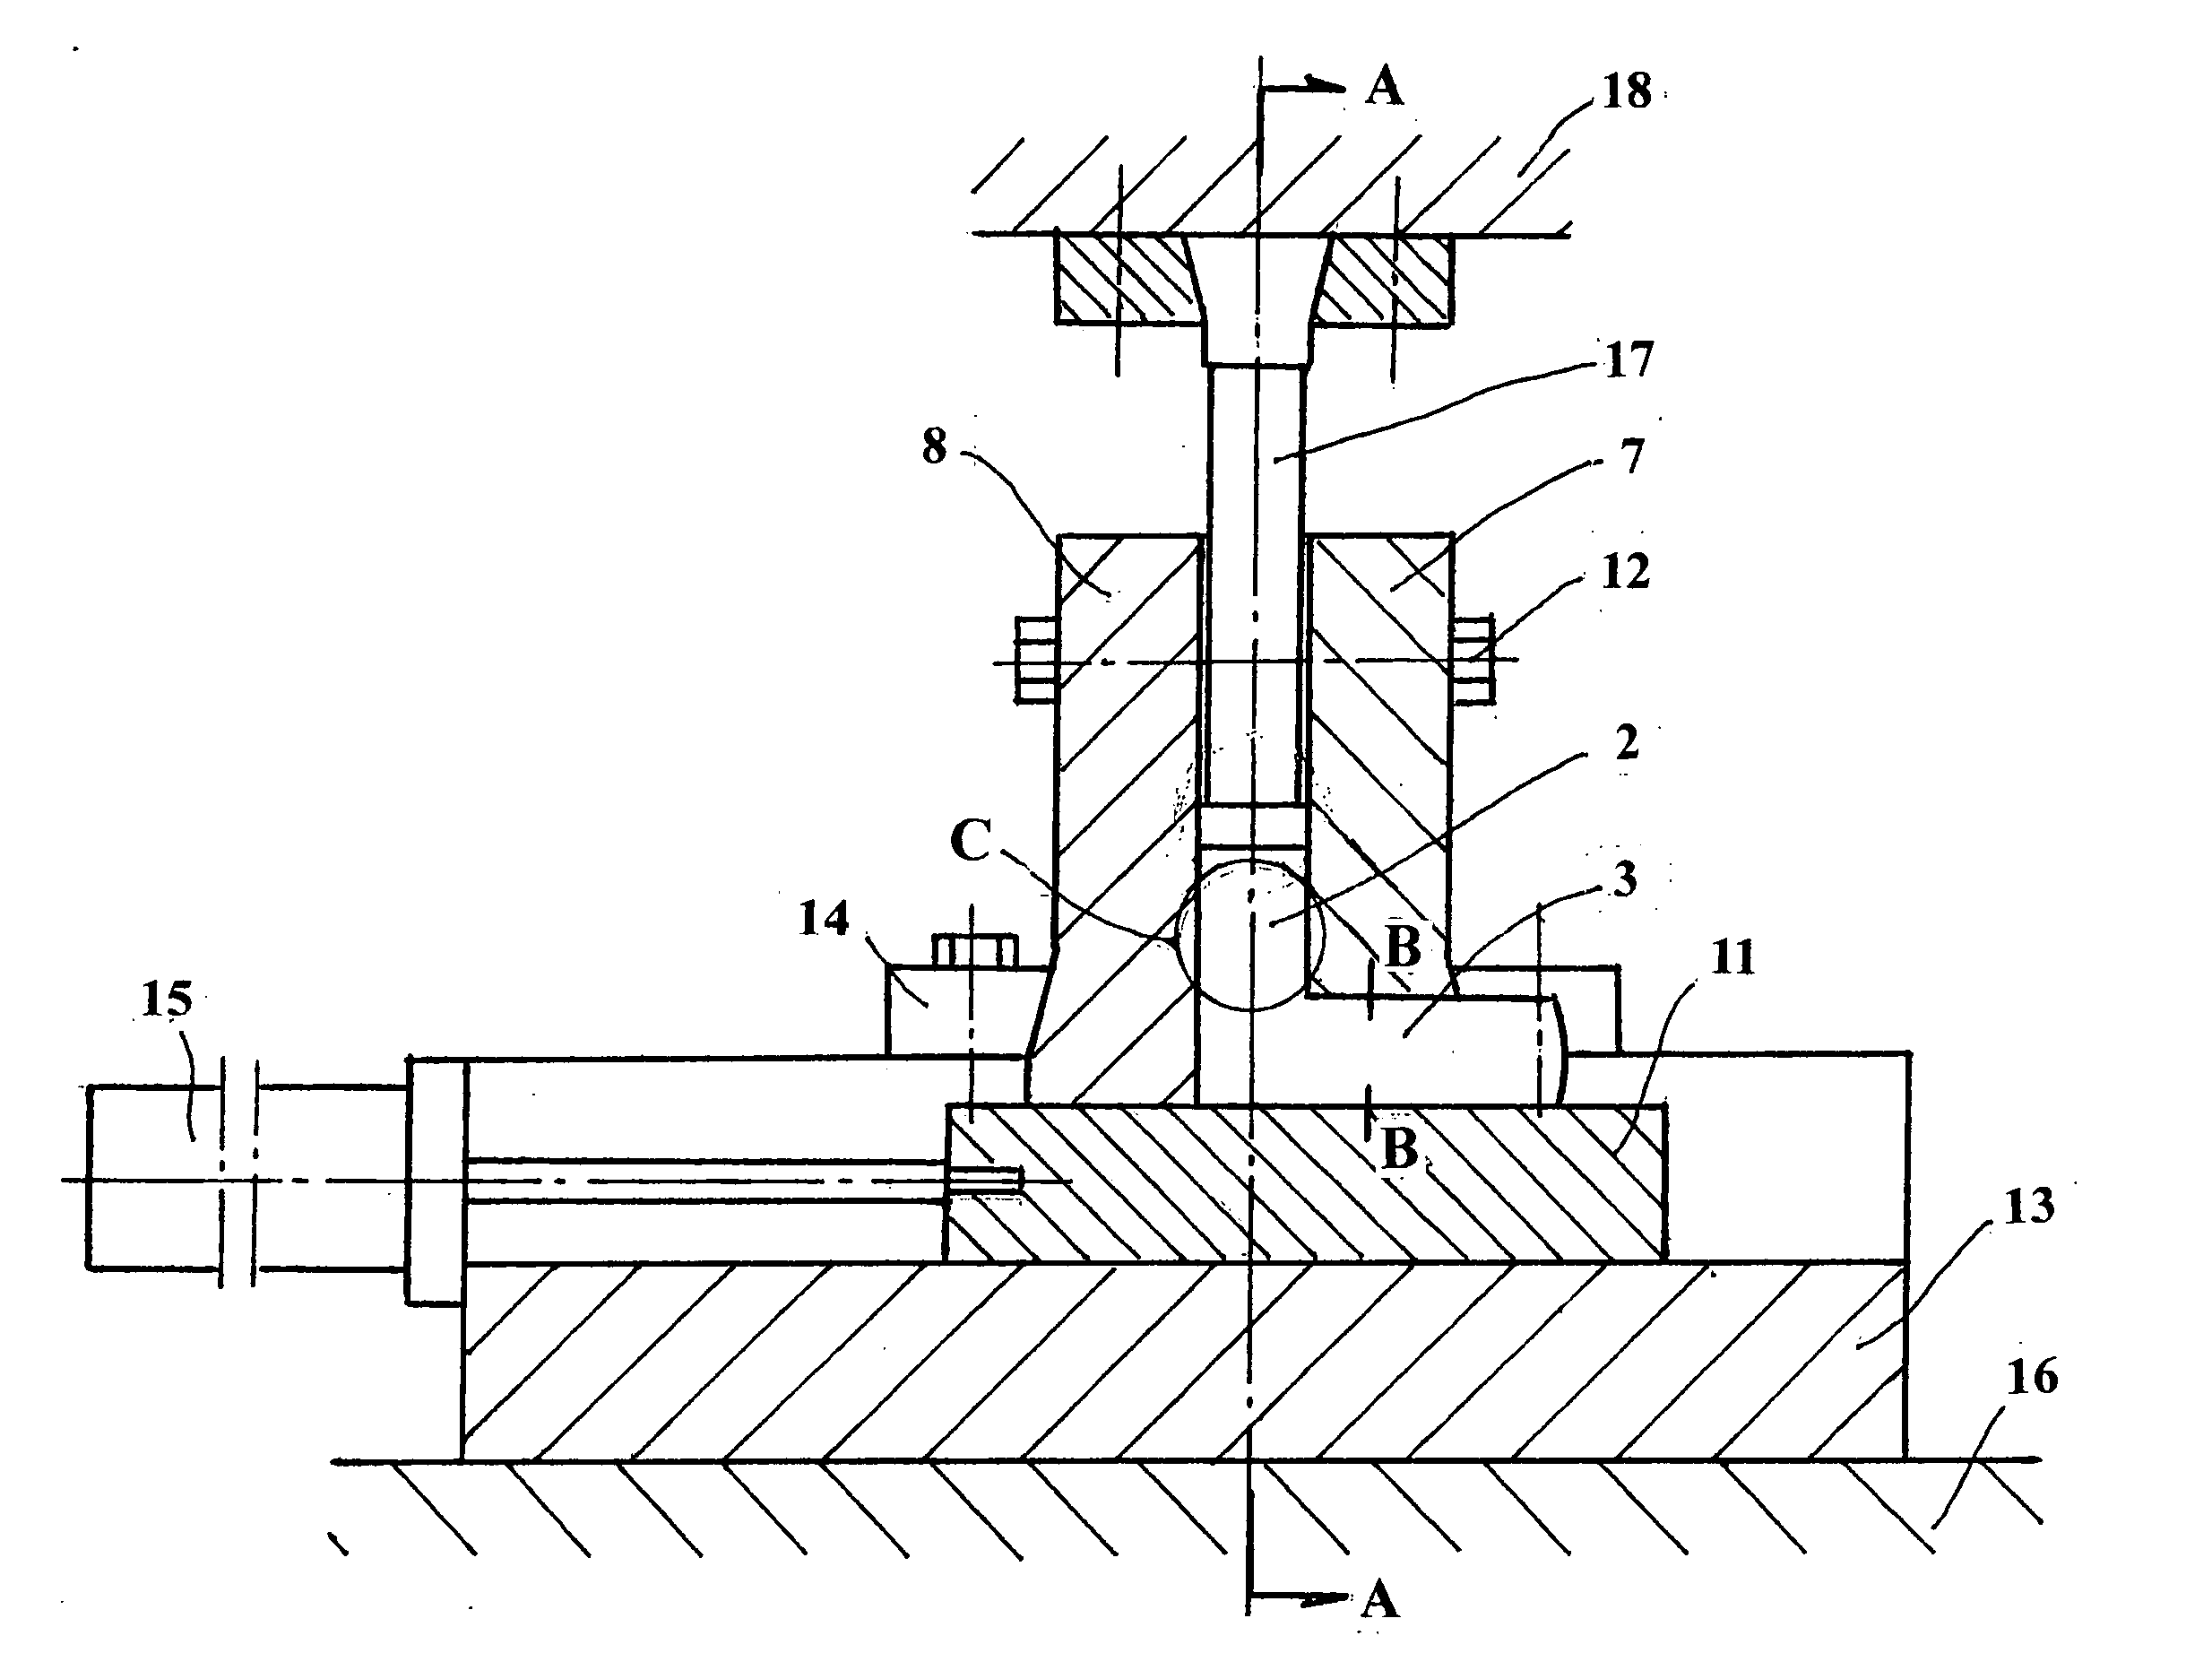 Method and apparatus for equal channel angular extrusion of flat billets